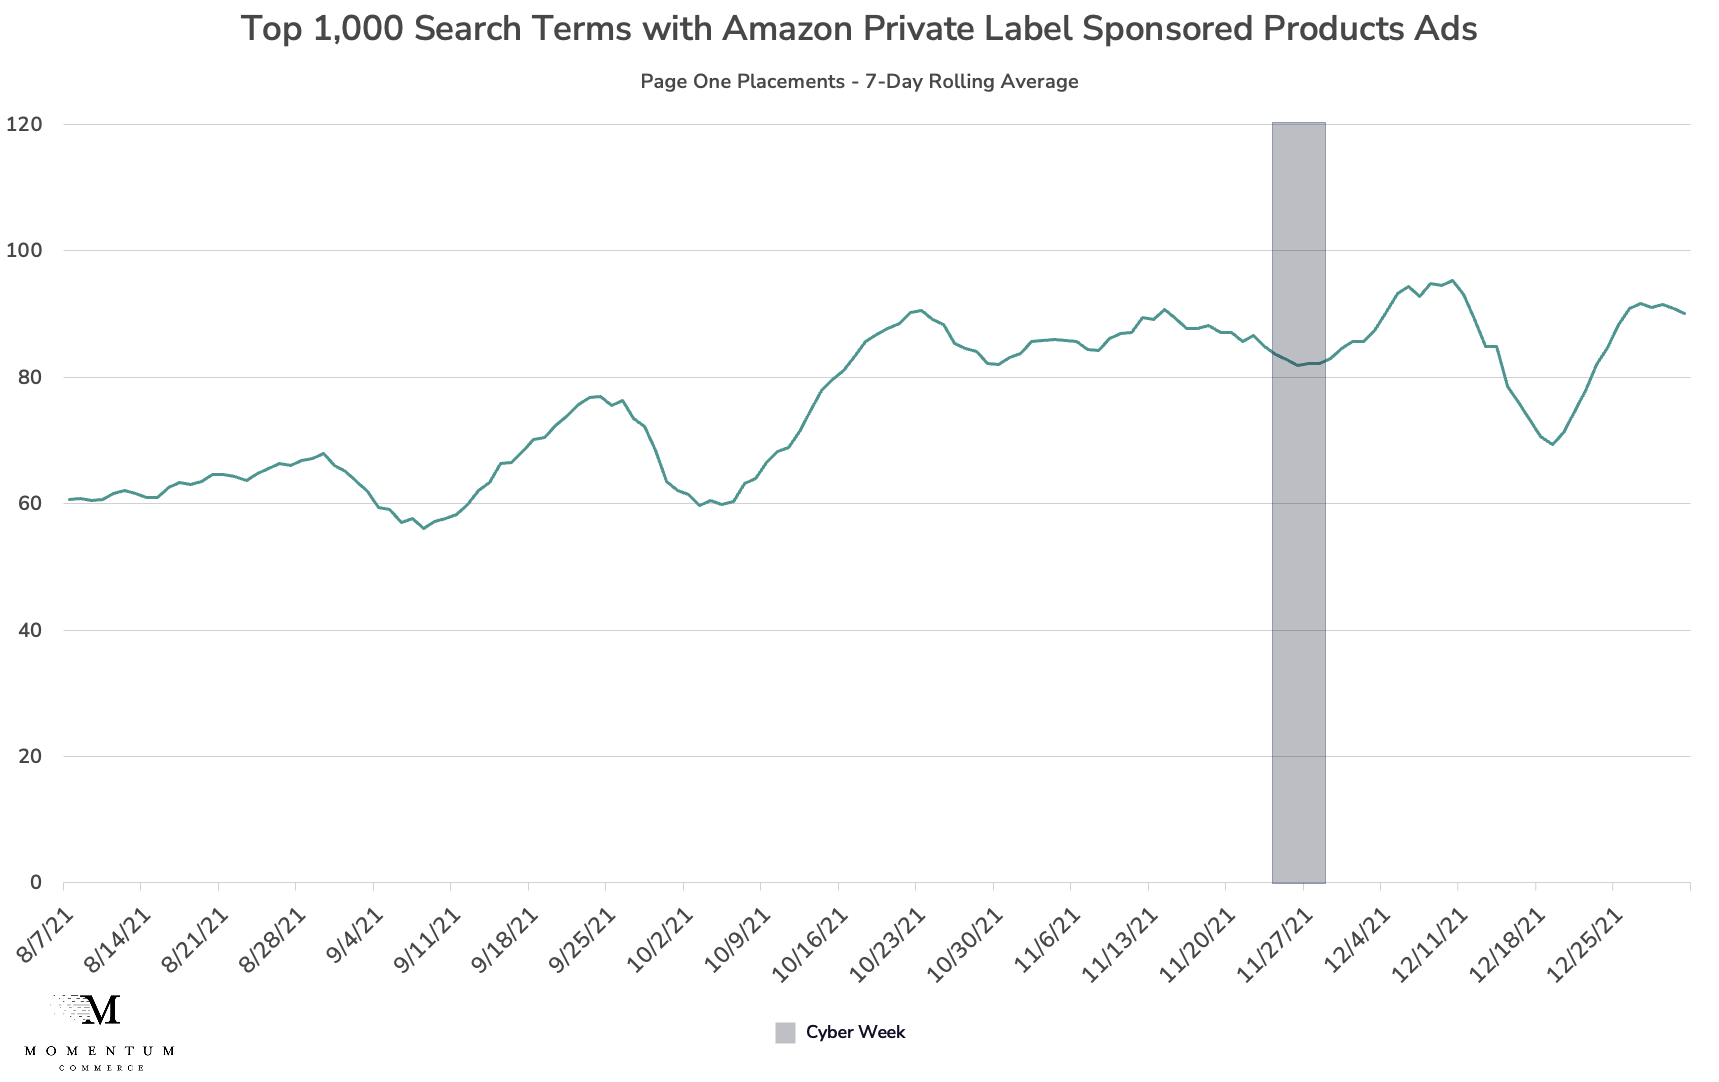 Top 1,000 Search Terms with Amazon Private Label Sponsored Product Ads